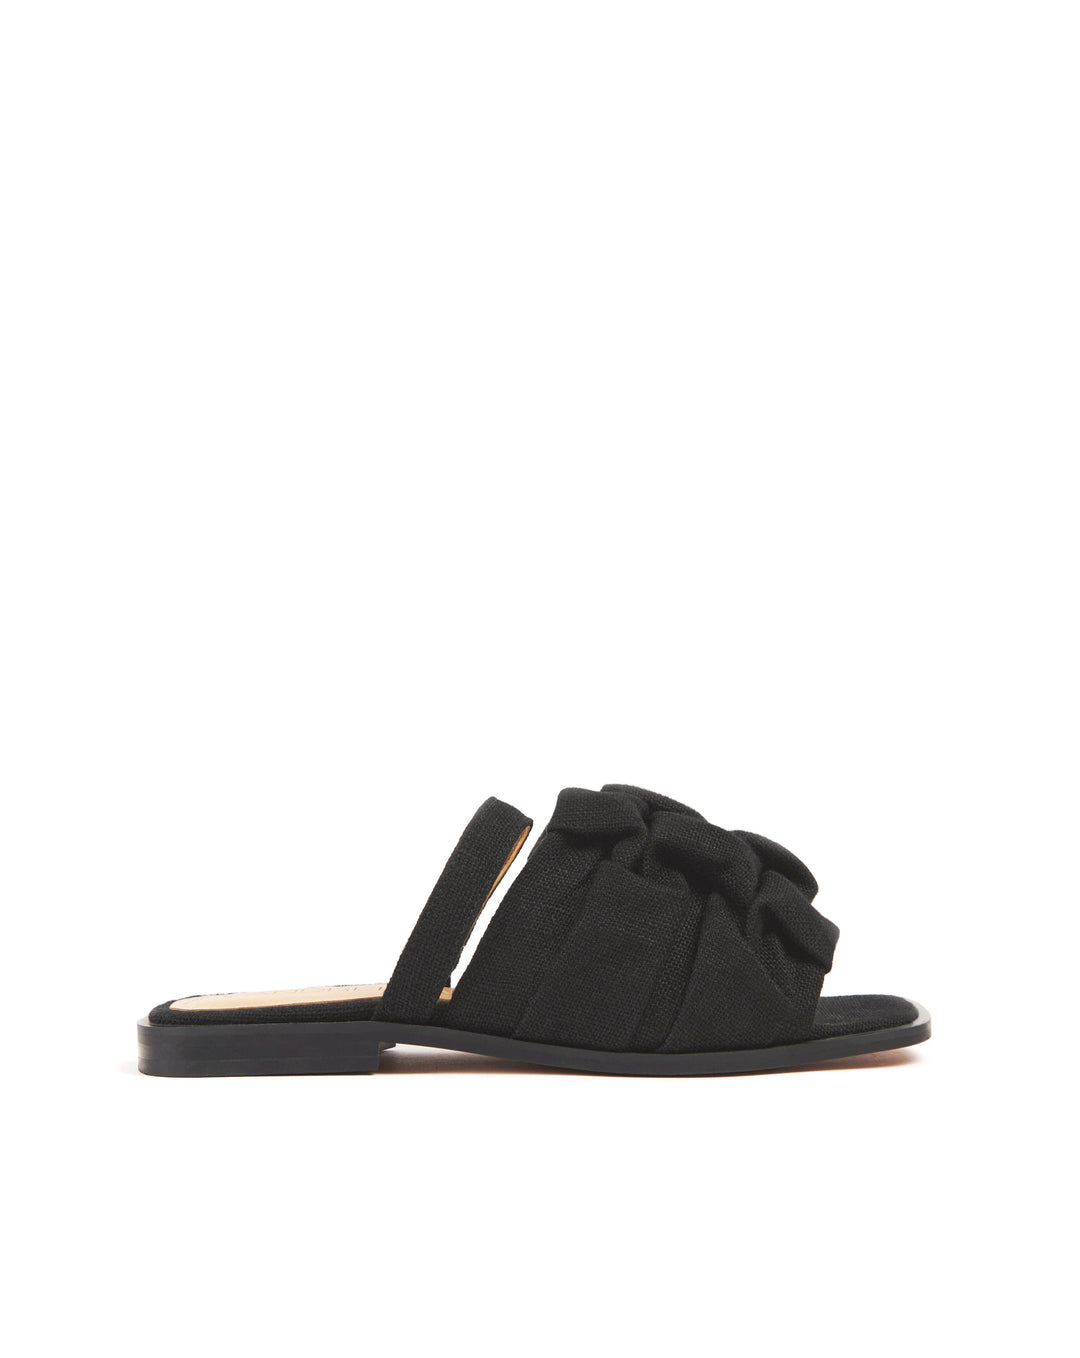 Vandrelaar Simone Linen Sandals in the colour black. Black fabric sandals. Women's slider sandal mules for spring summer. Made from linen and eco-friendly materials. 100% vegan cruelty-free sandals for women. Square toe sandals with padding for extra comfort.